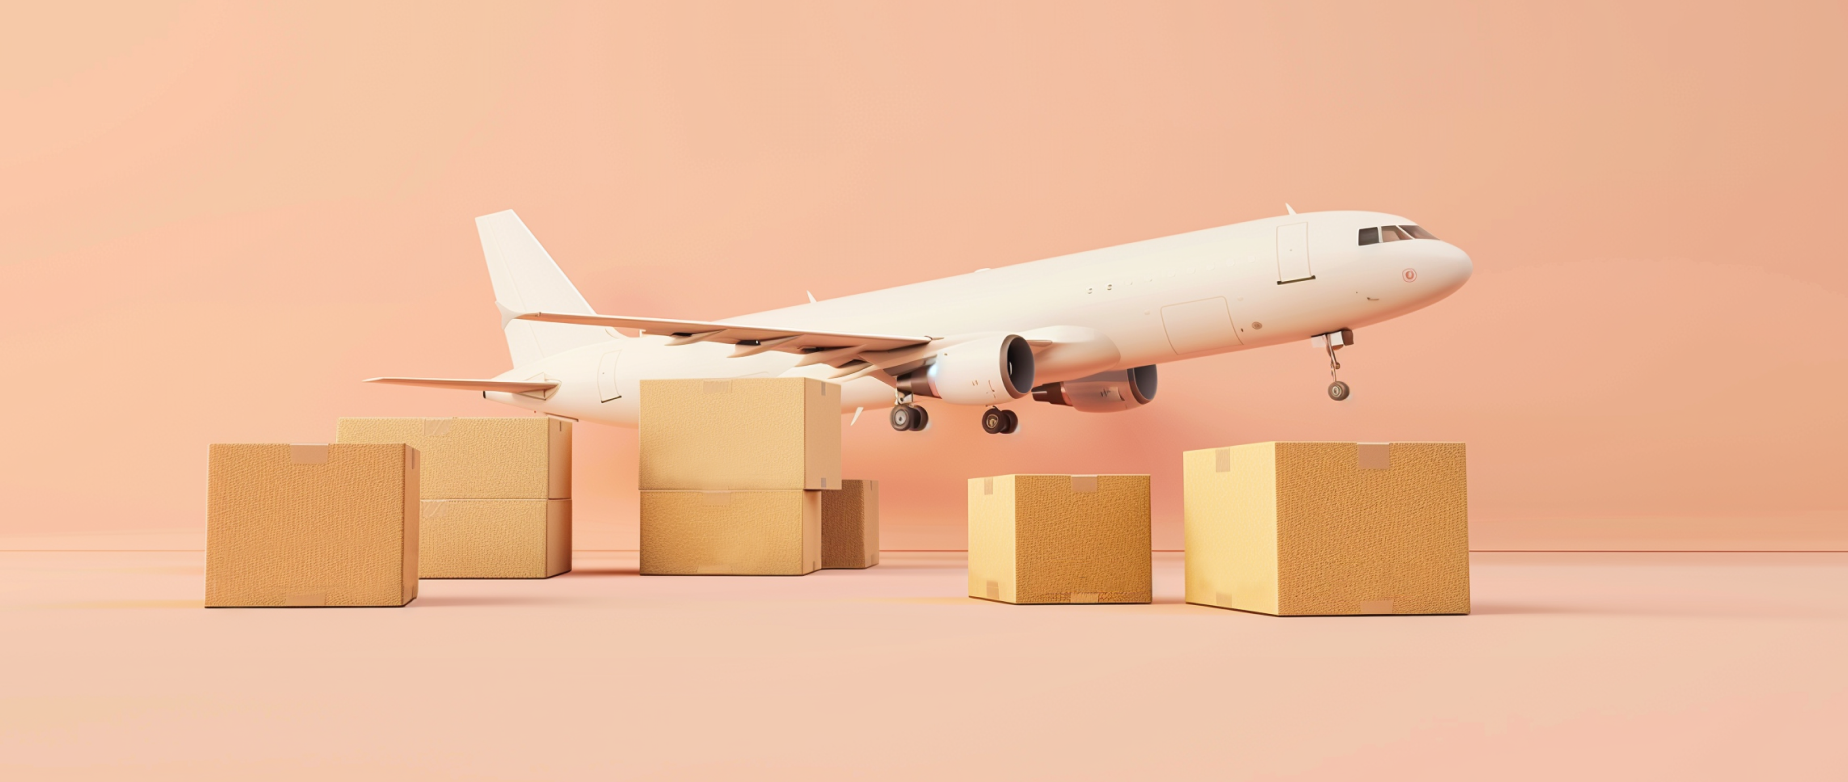 a plane flying over boxes representing dropshipping